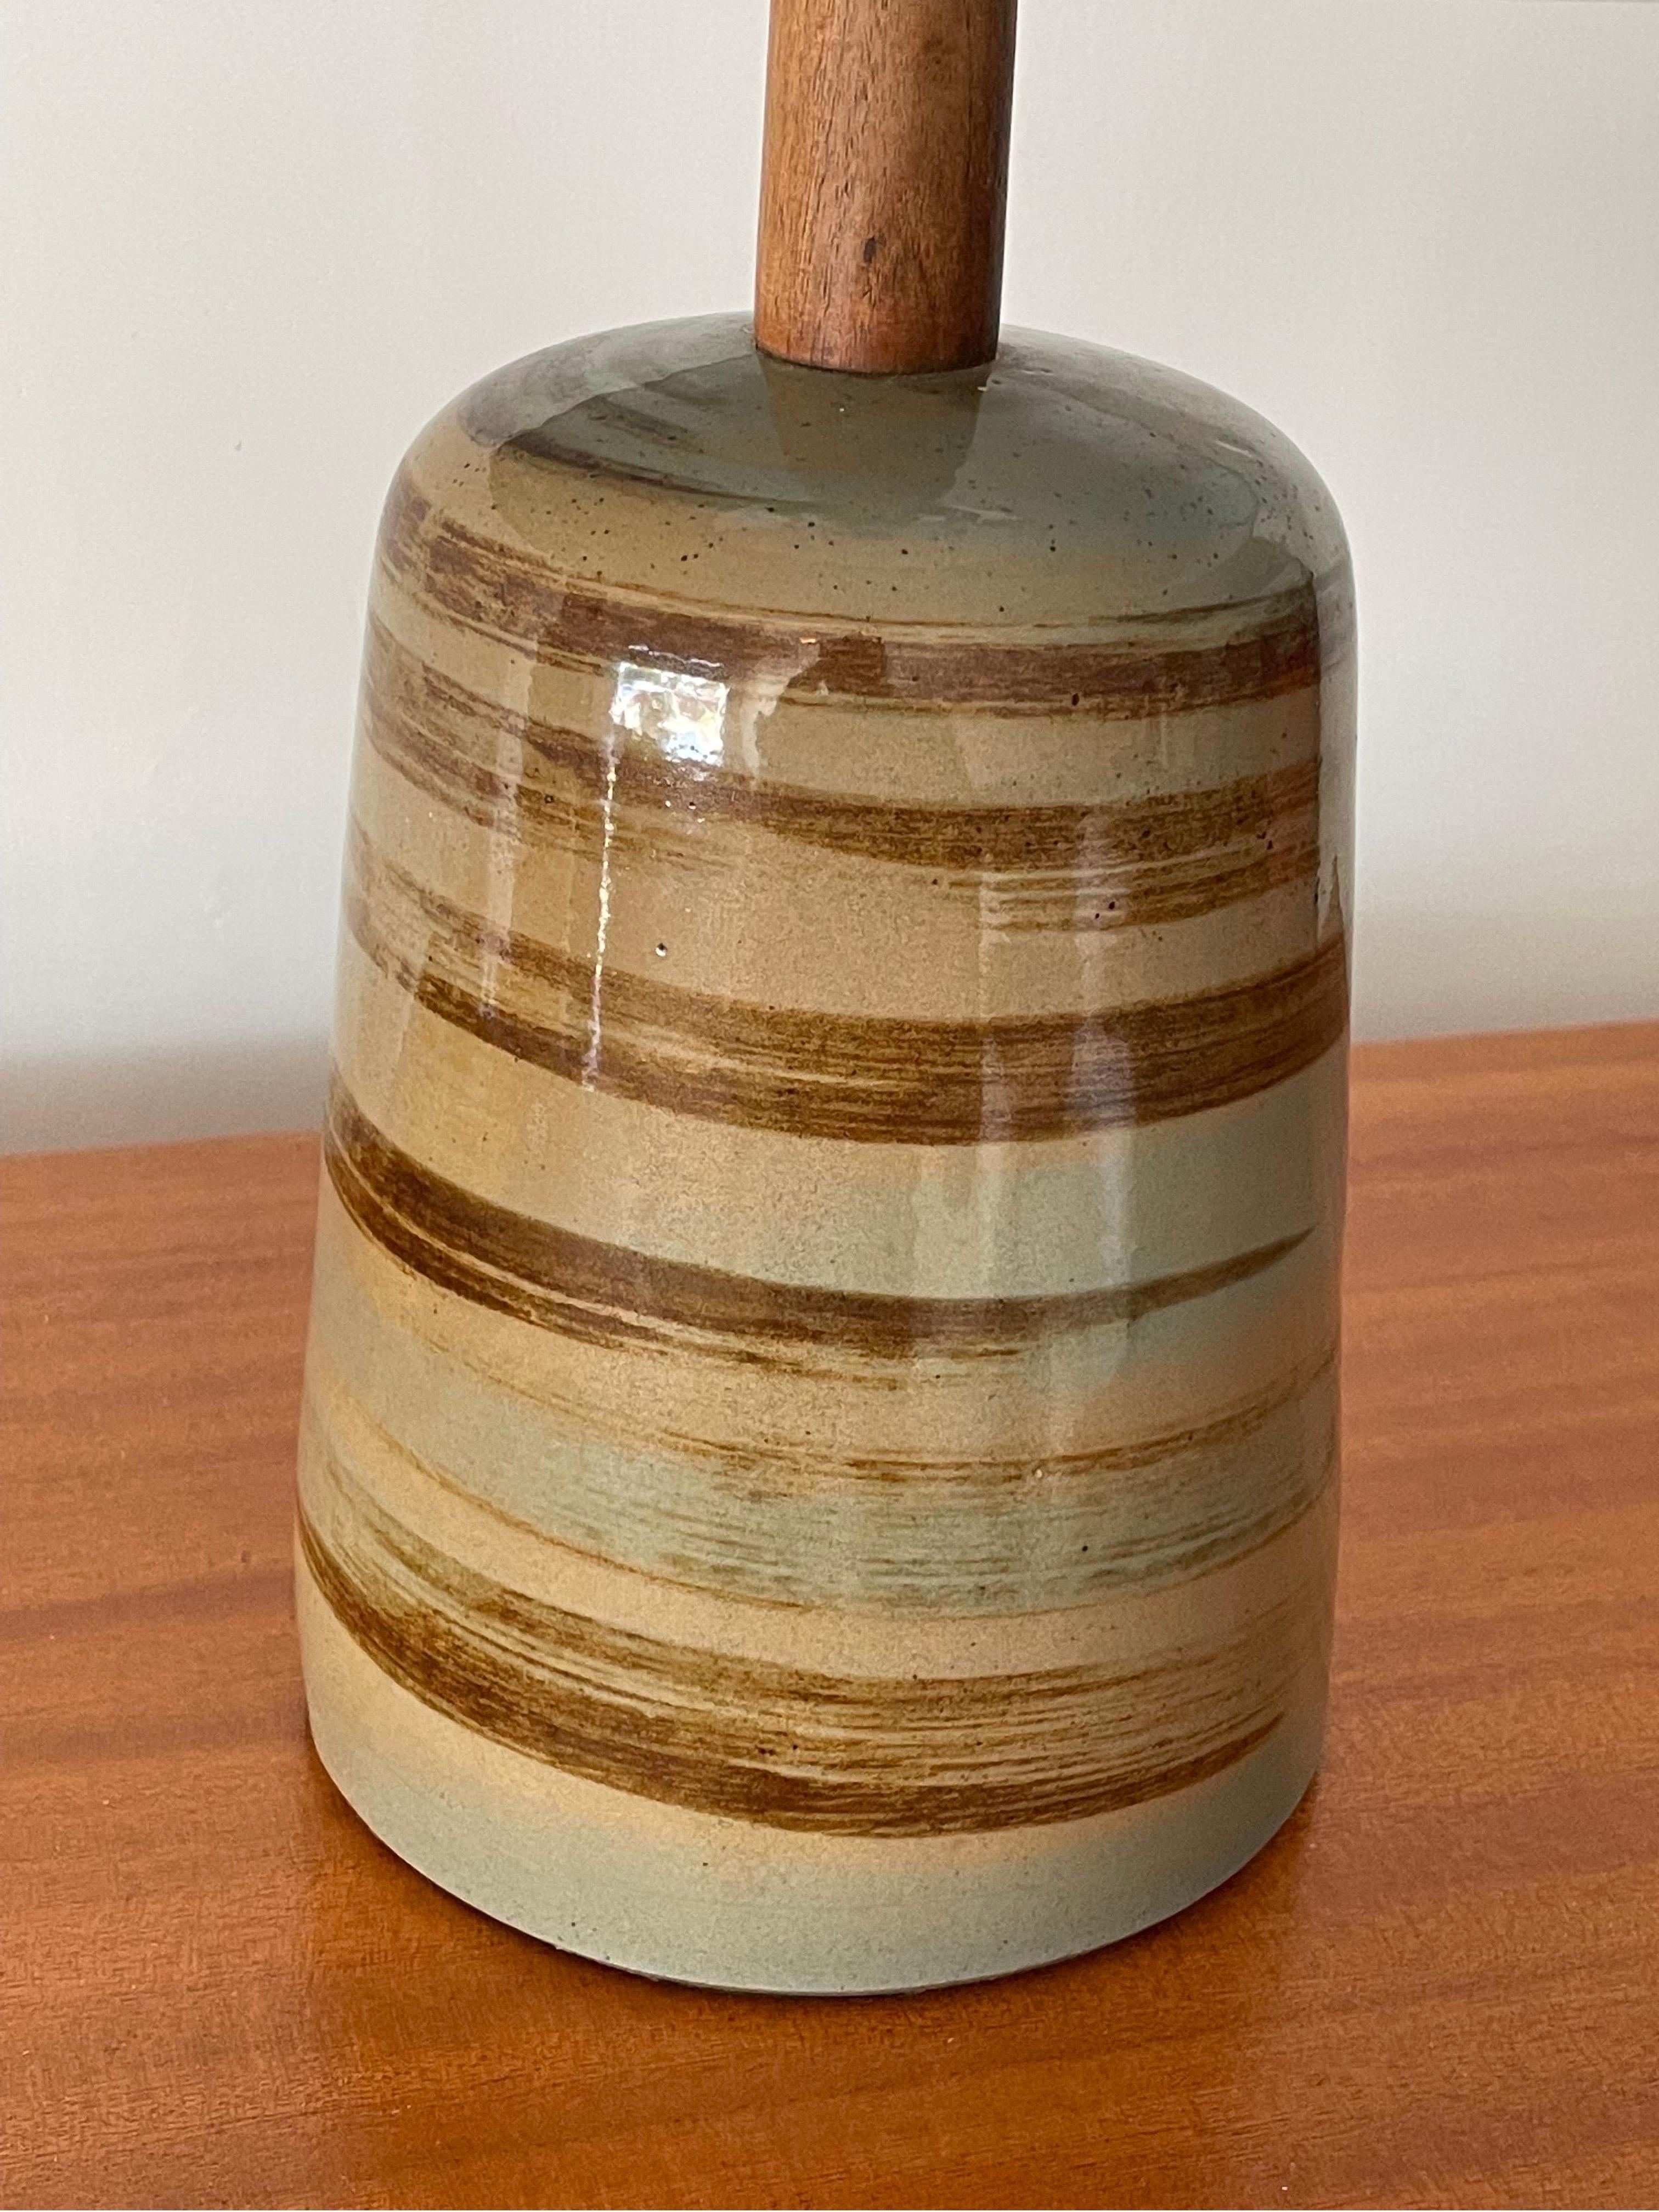 Charming table lamp designed by famed ceramicist duo Jane and Gordon Martz for Marshall Studios. Features a stout body with long walnut neck. 

Overall dimensions:
20” tall
13” wide

Ceramic 
8” tall
6” wide.